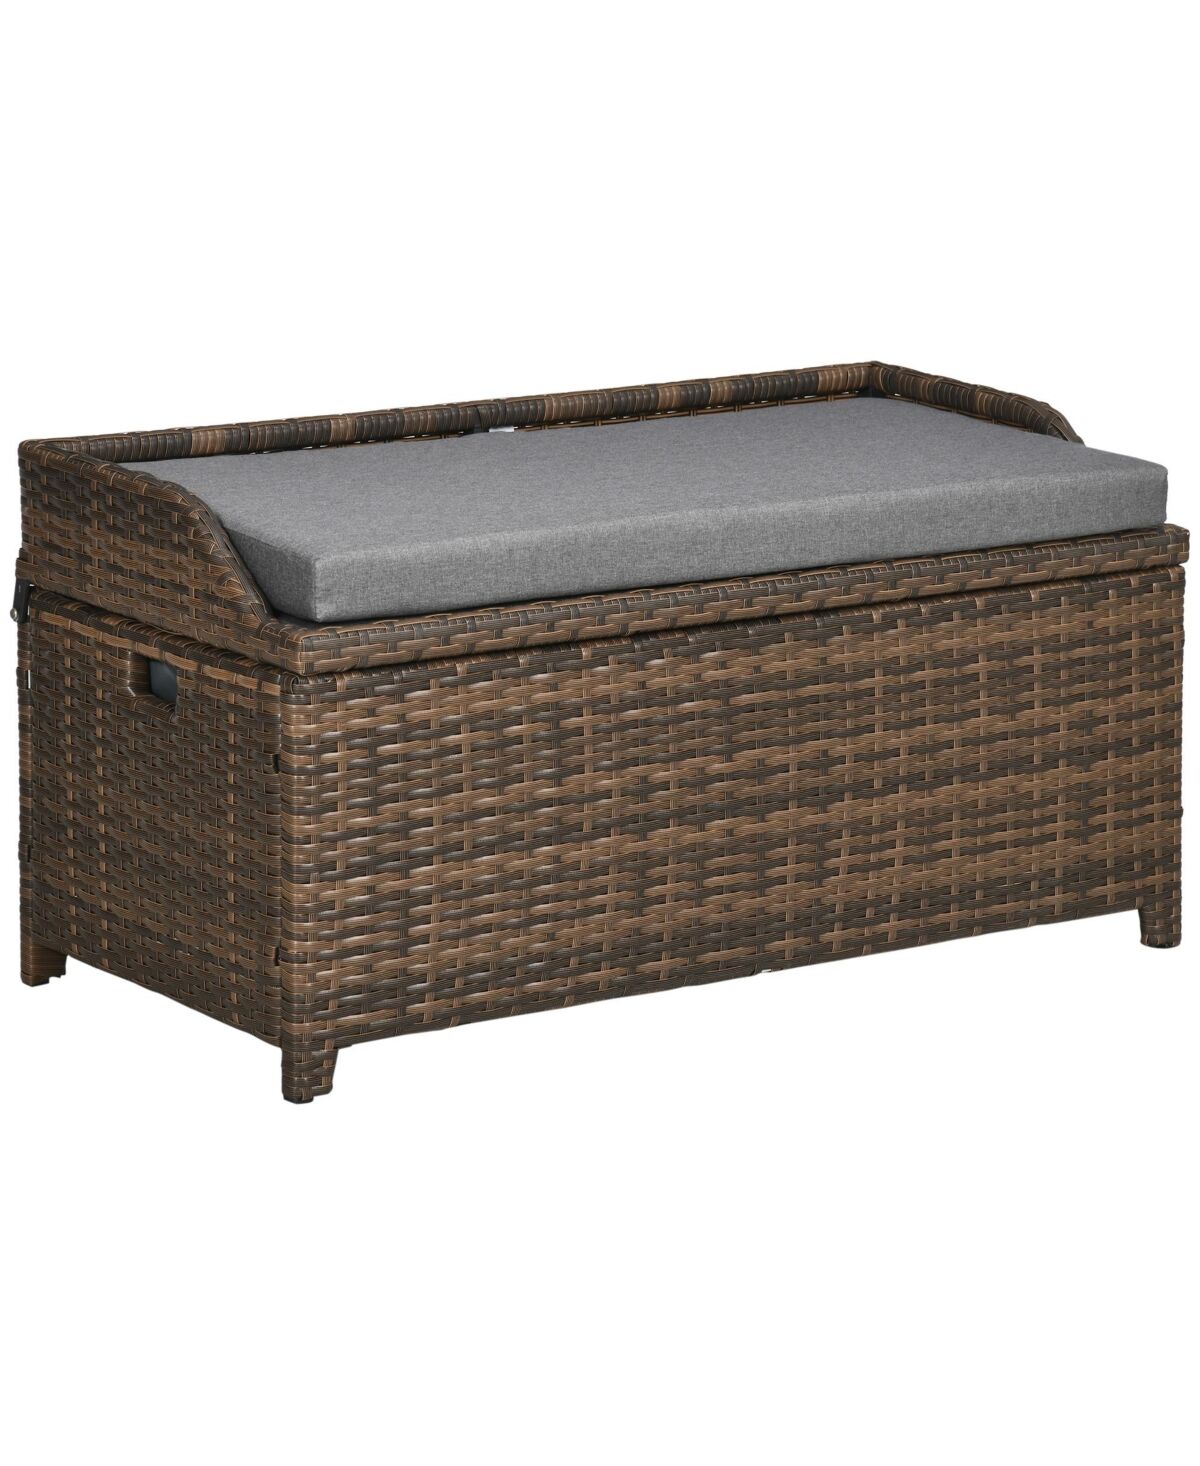 Outsunny Patio Wicker Storage Bench, Cushioned Outdoor Pe Rattan Patio Furniture, Air Strut Assisted Easy Open, Two-In-One Seat Box with Handles Seat,